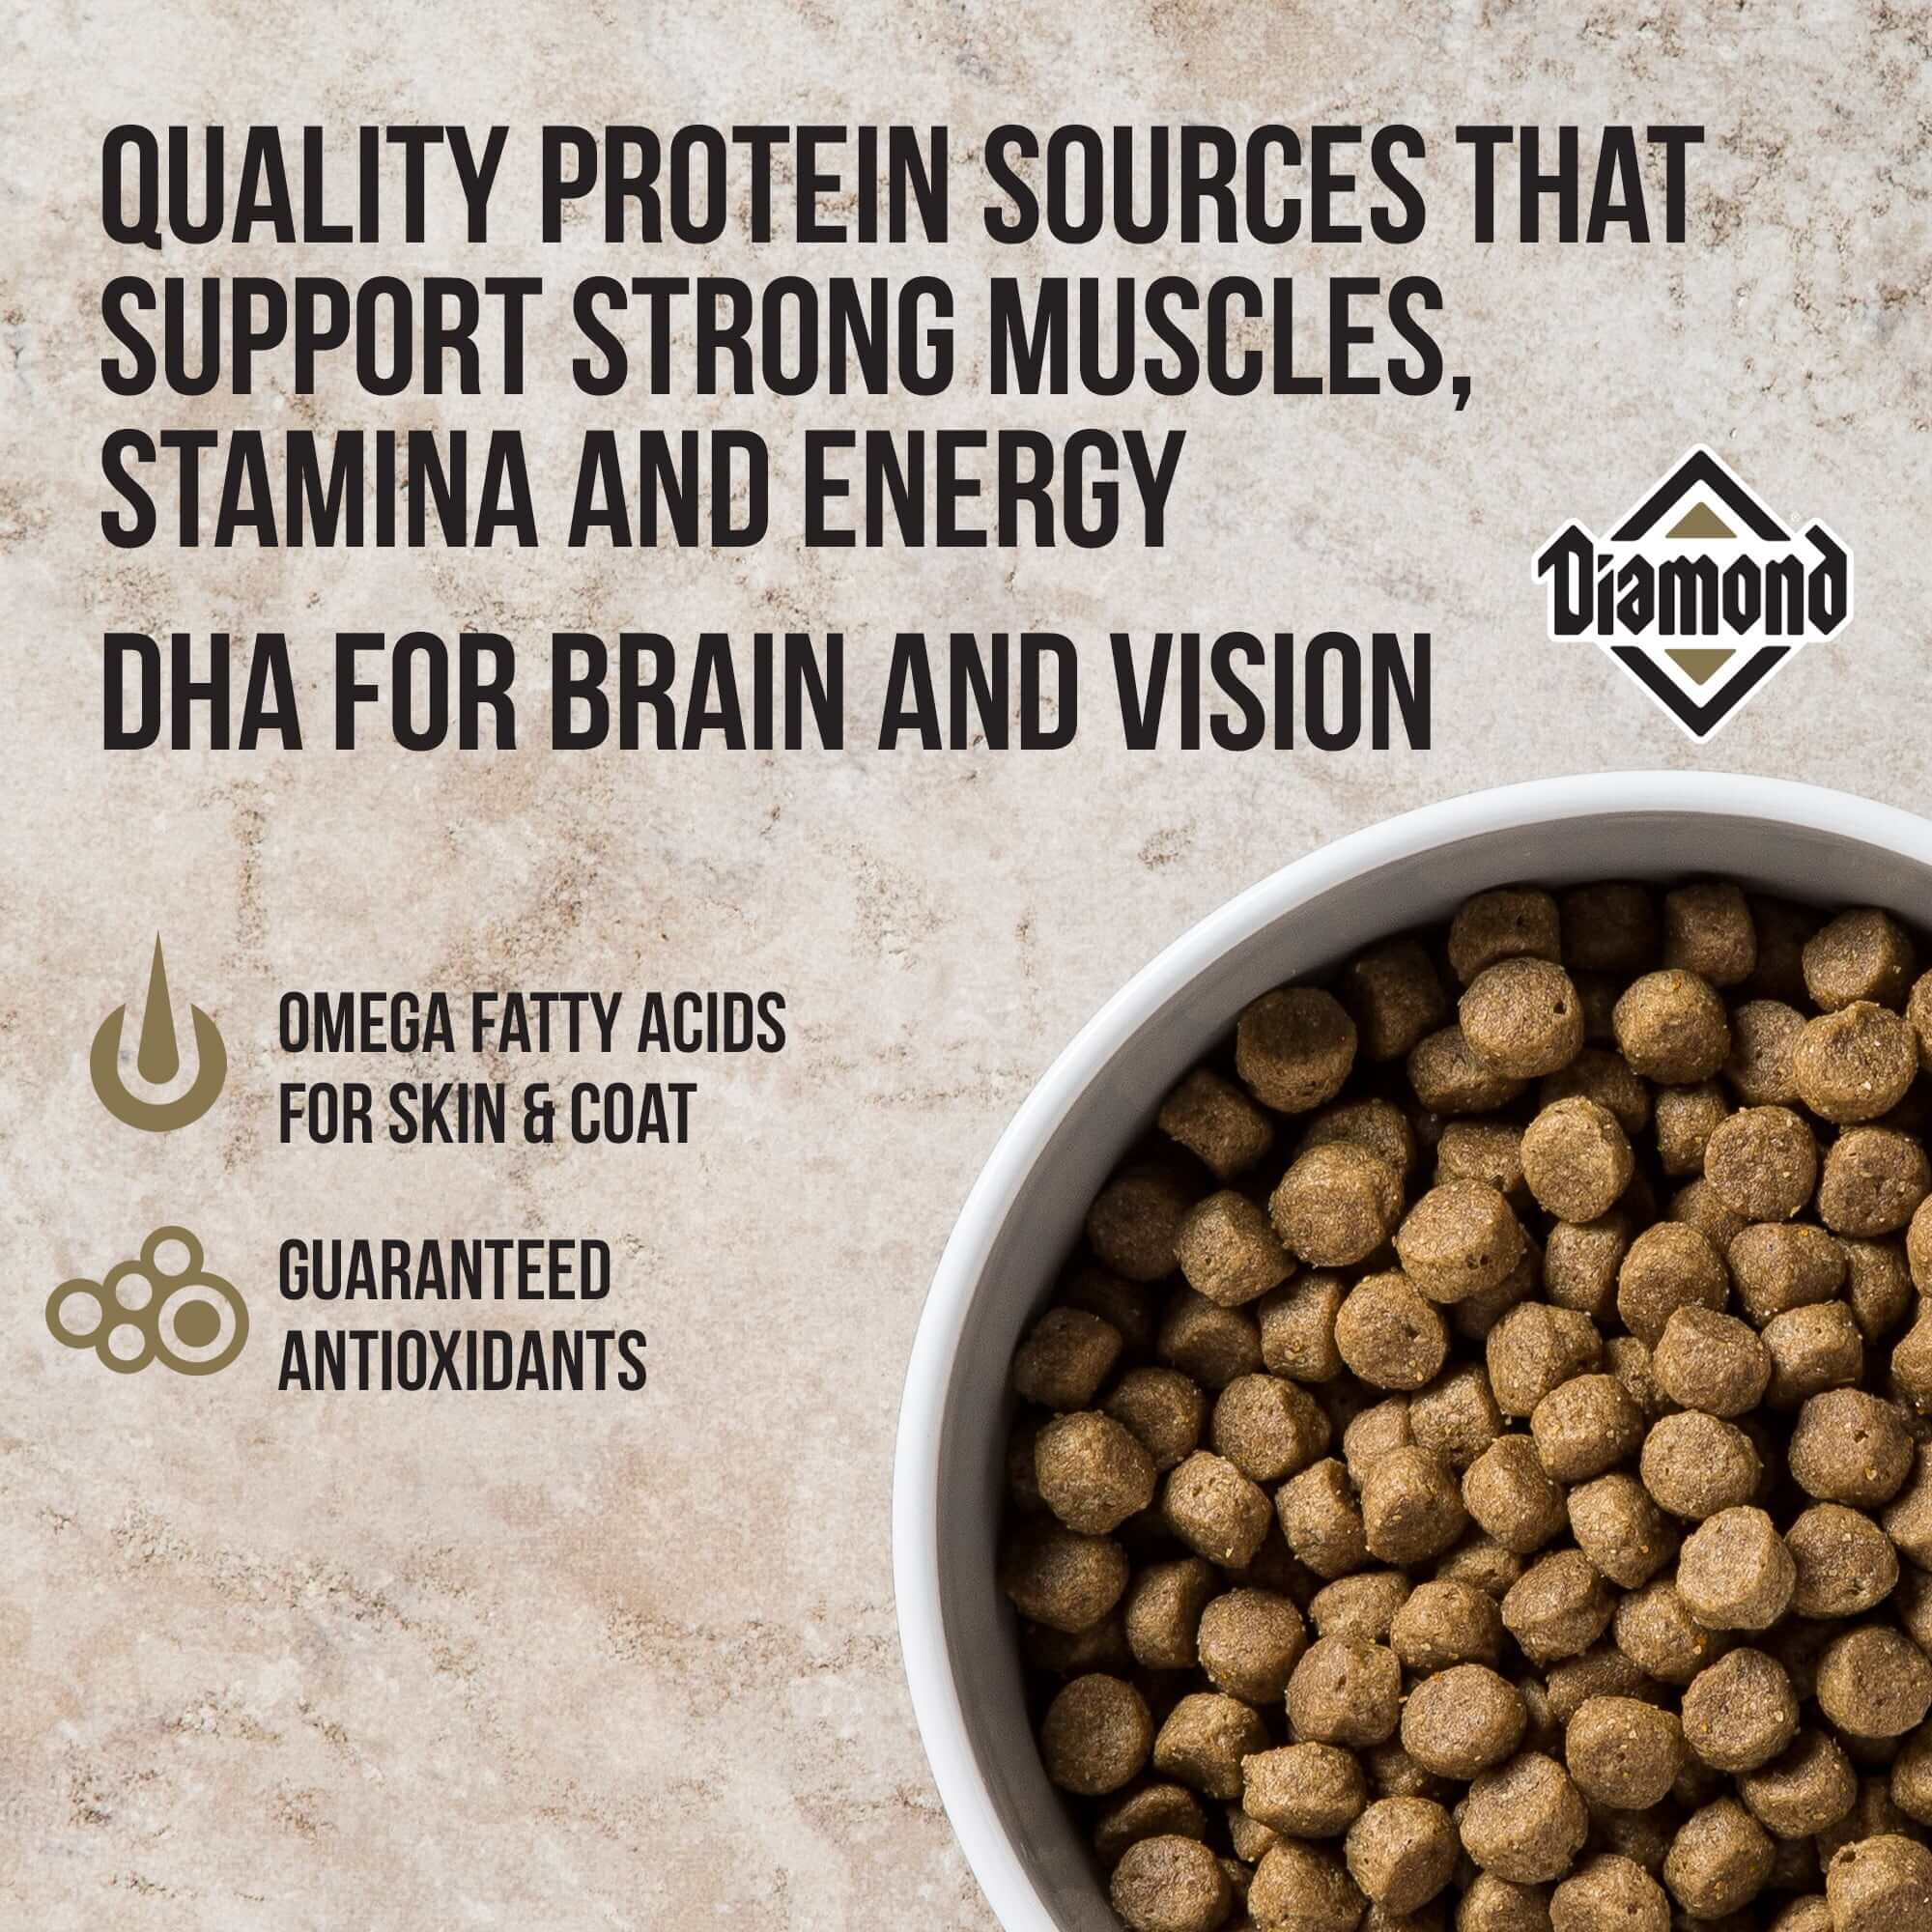 Diamond Quality protein sources that support strong muscles, stamina and energy